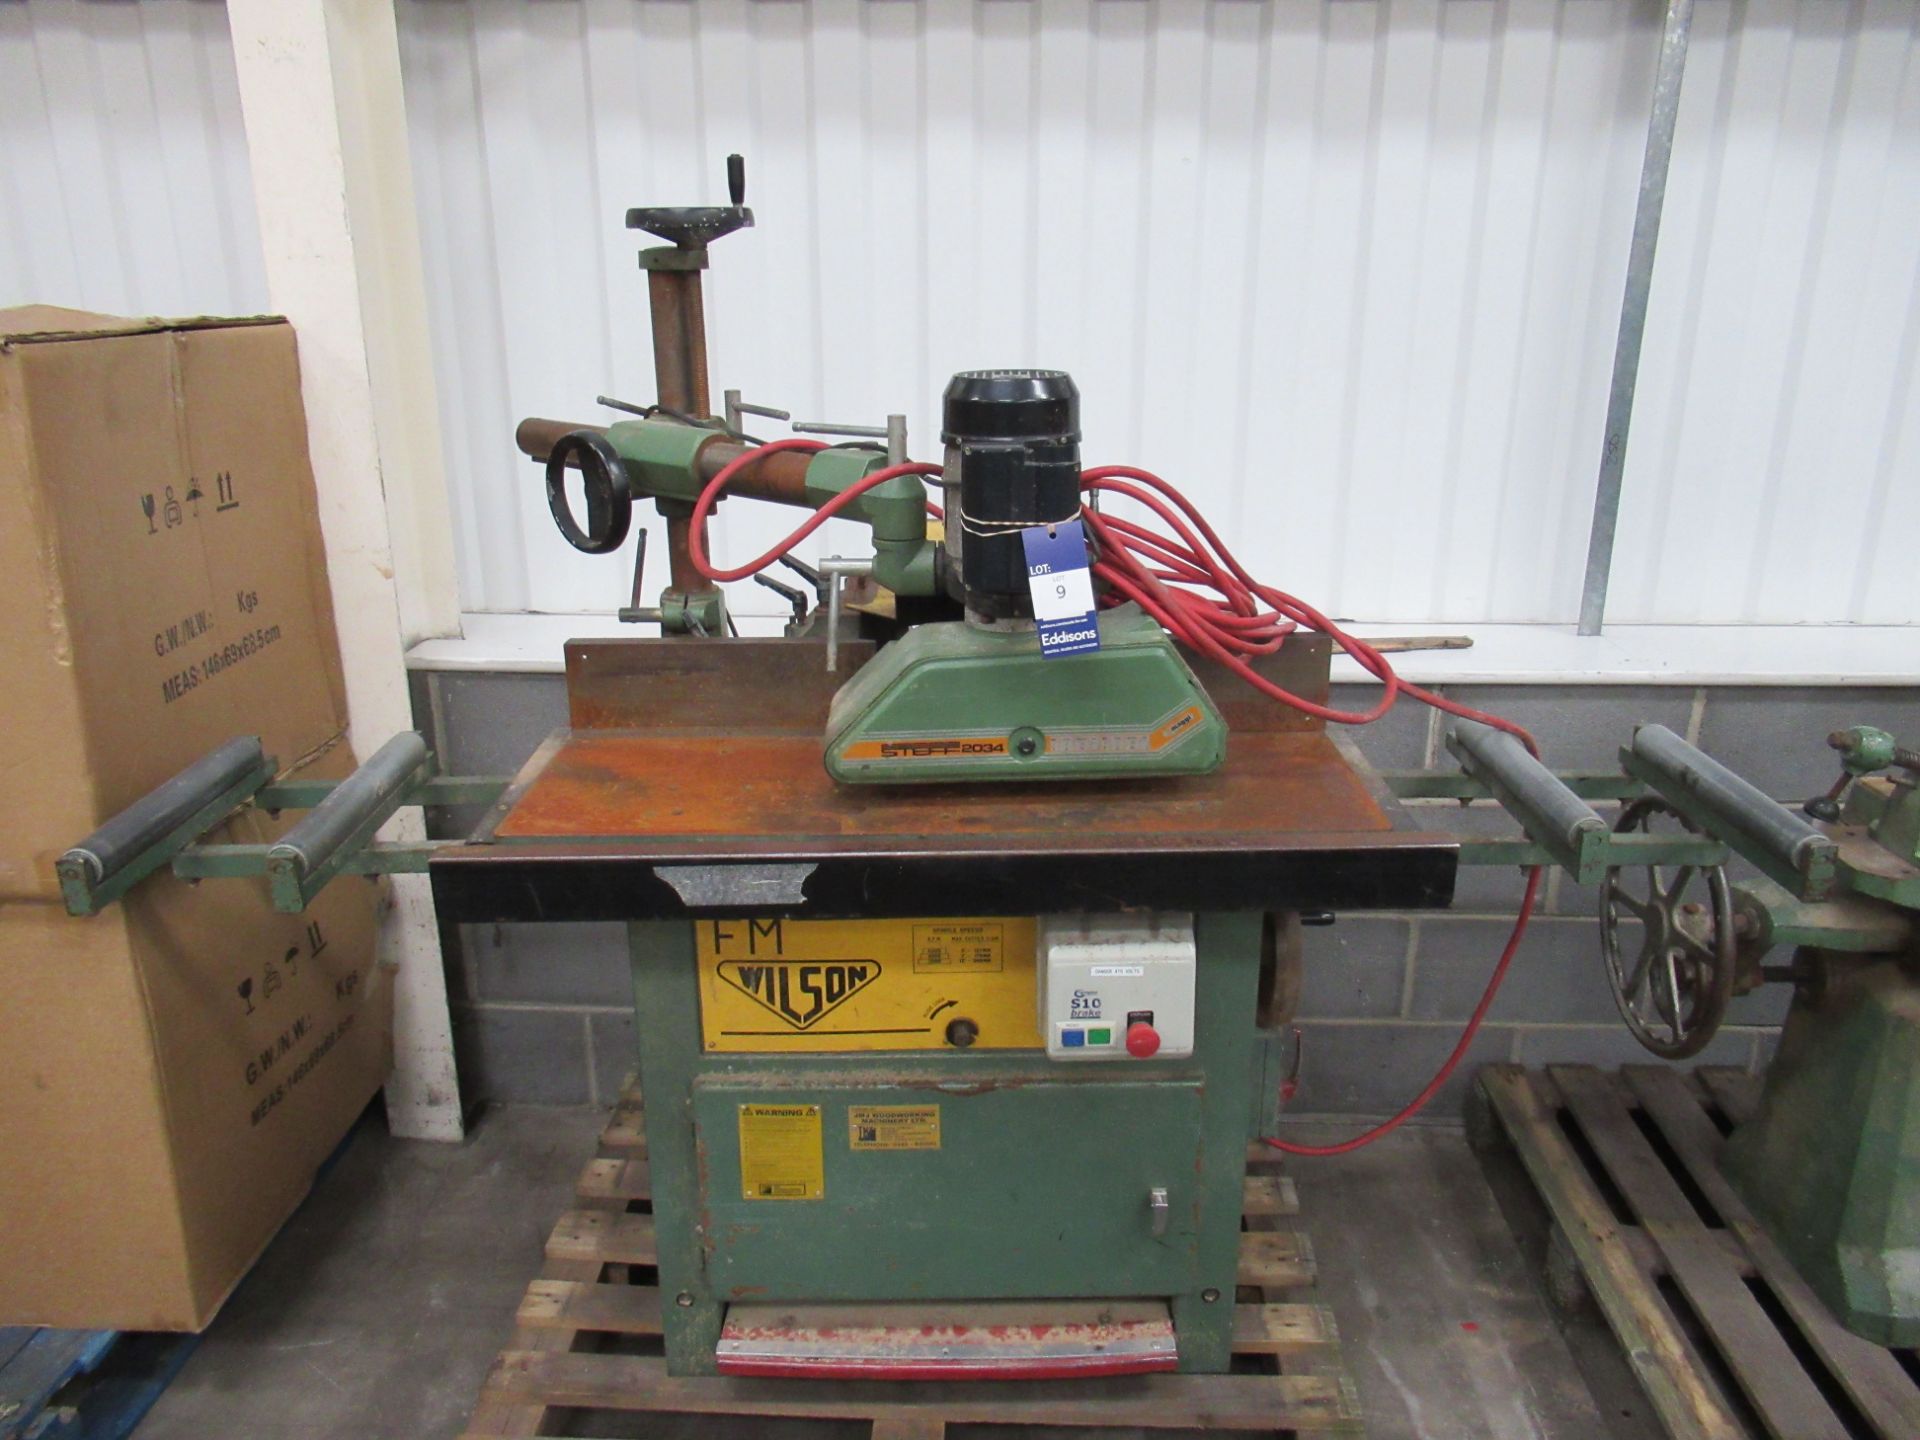 Wilson FM Spindle Moulder with STEFF 2054 Roller Powered Feed & Fabricated Rollers - 3ph